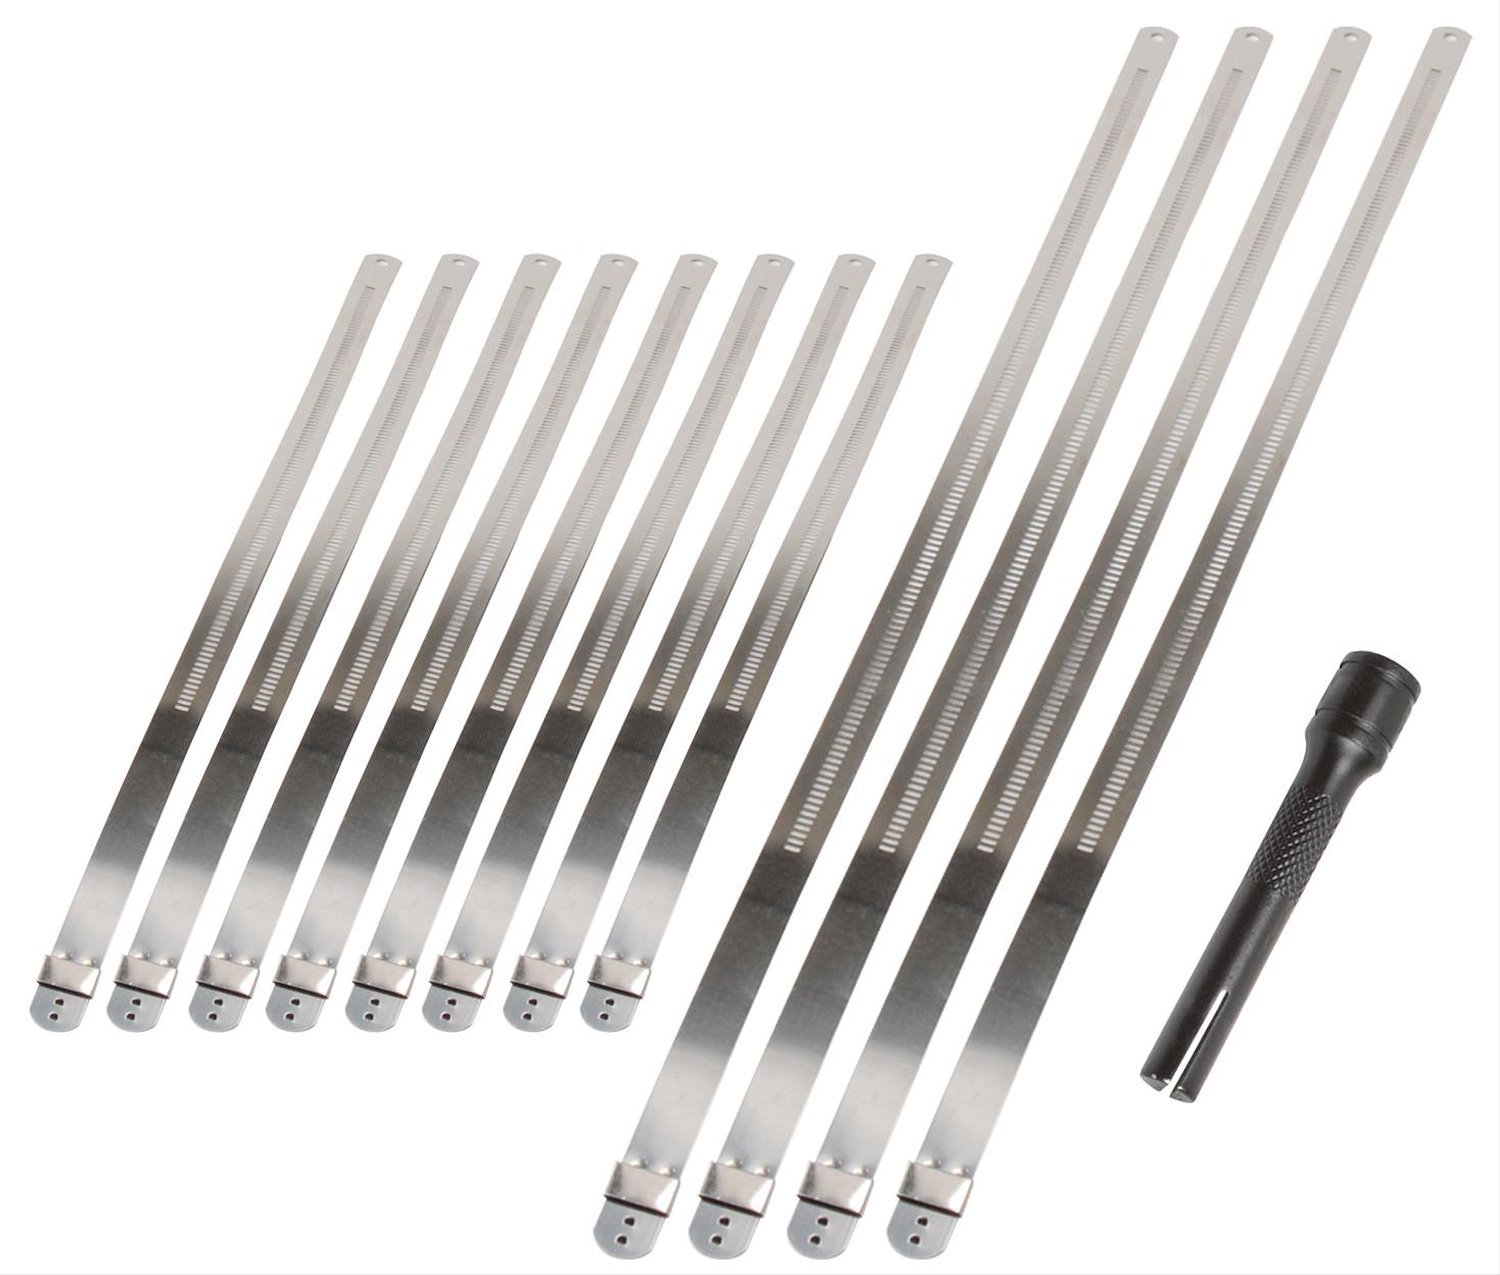 Stainless Steel Locking Tool and Tie Kit